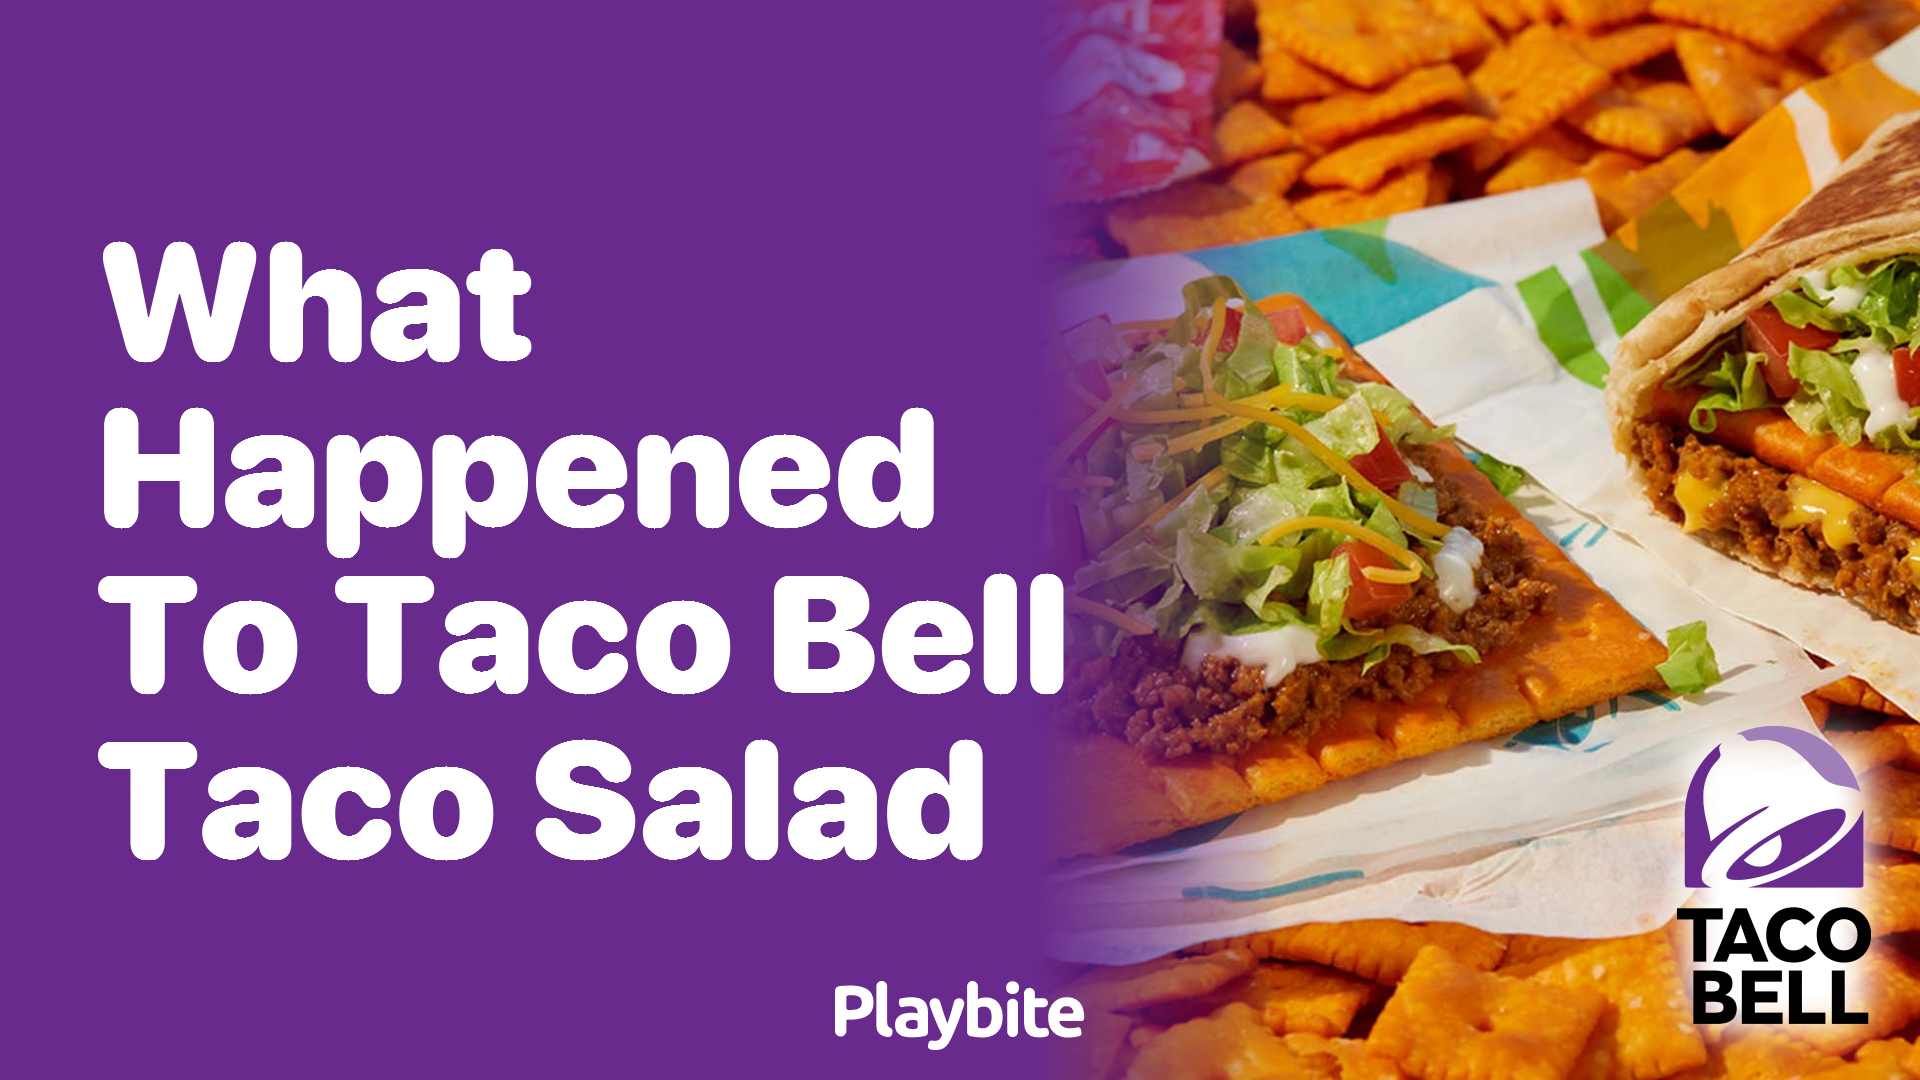 What Happened to Taco Bell Taco Salad?